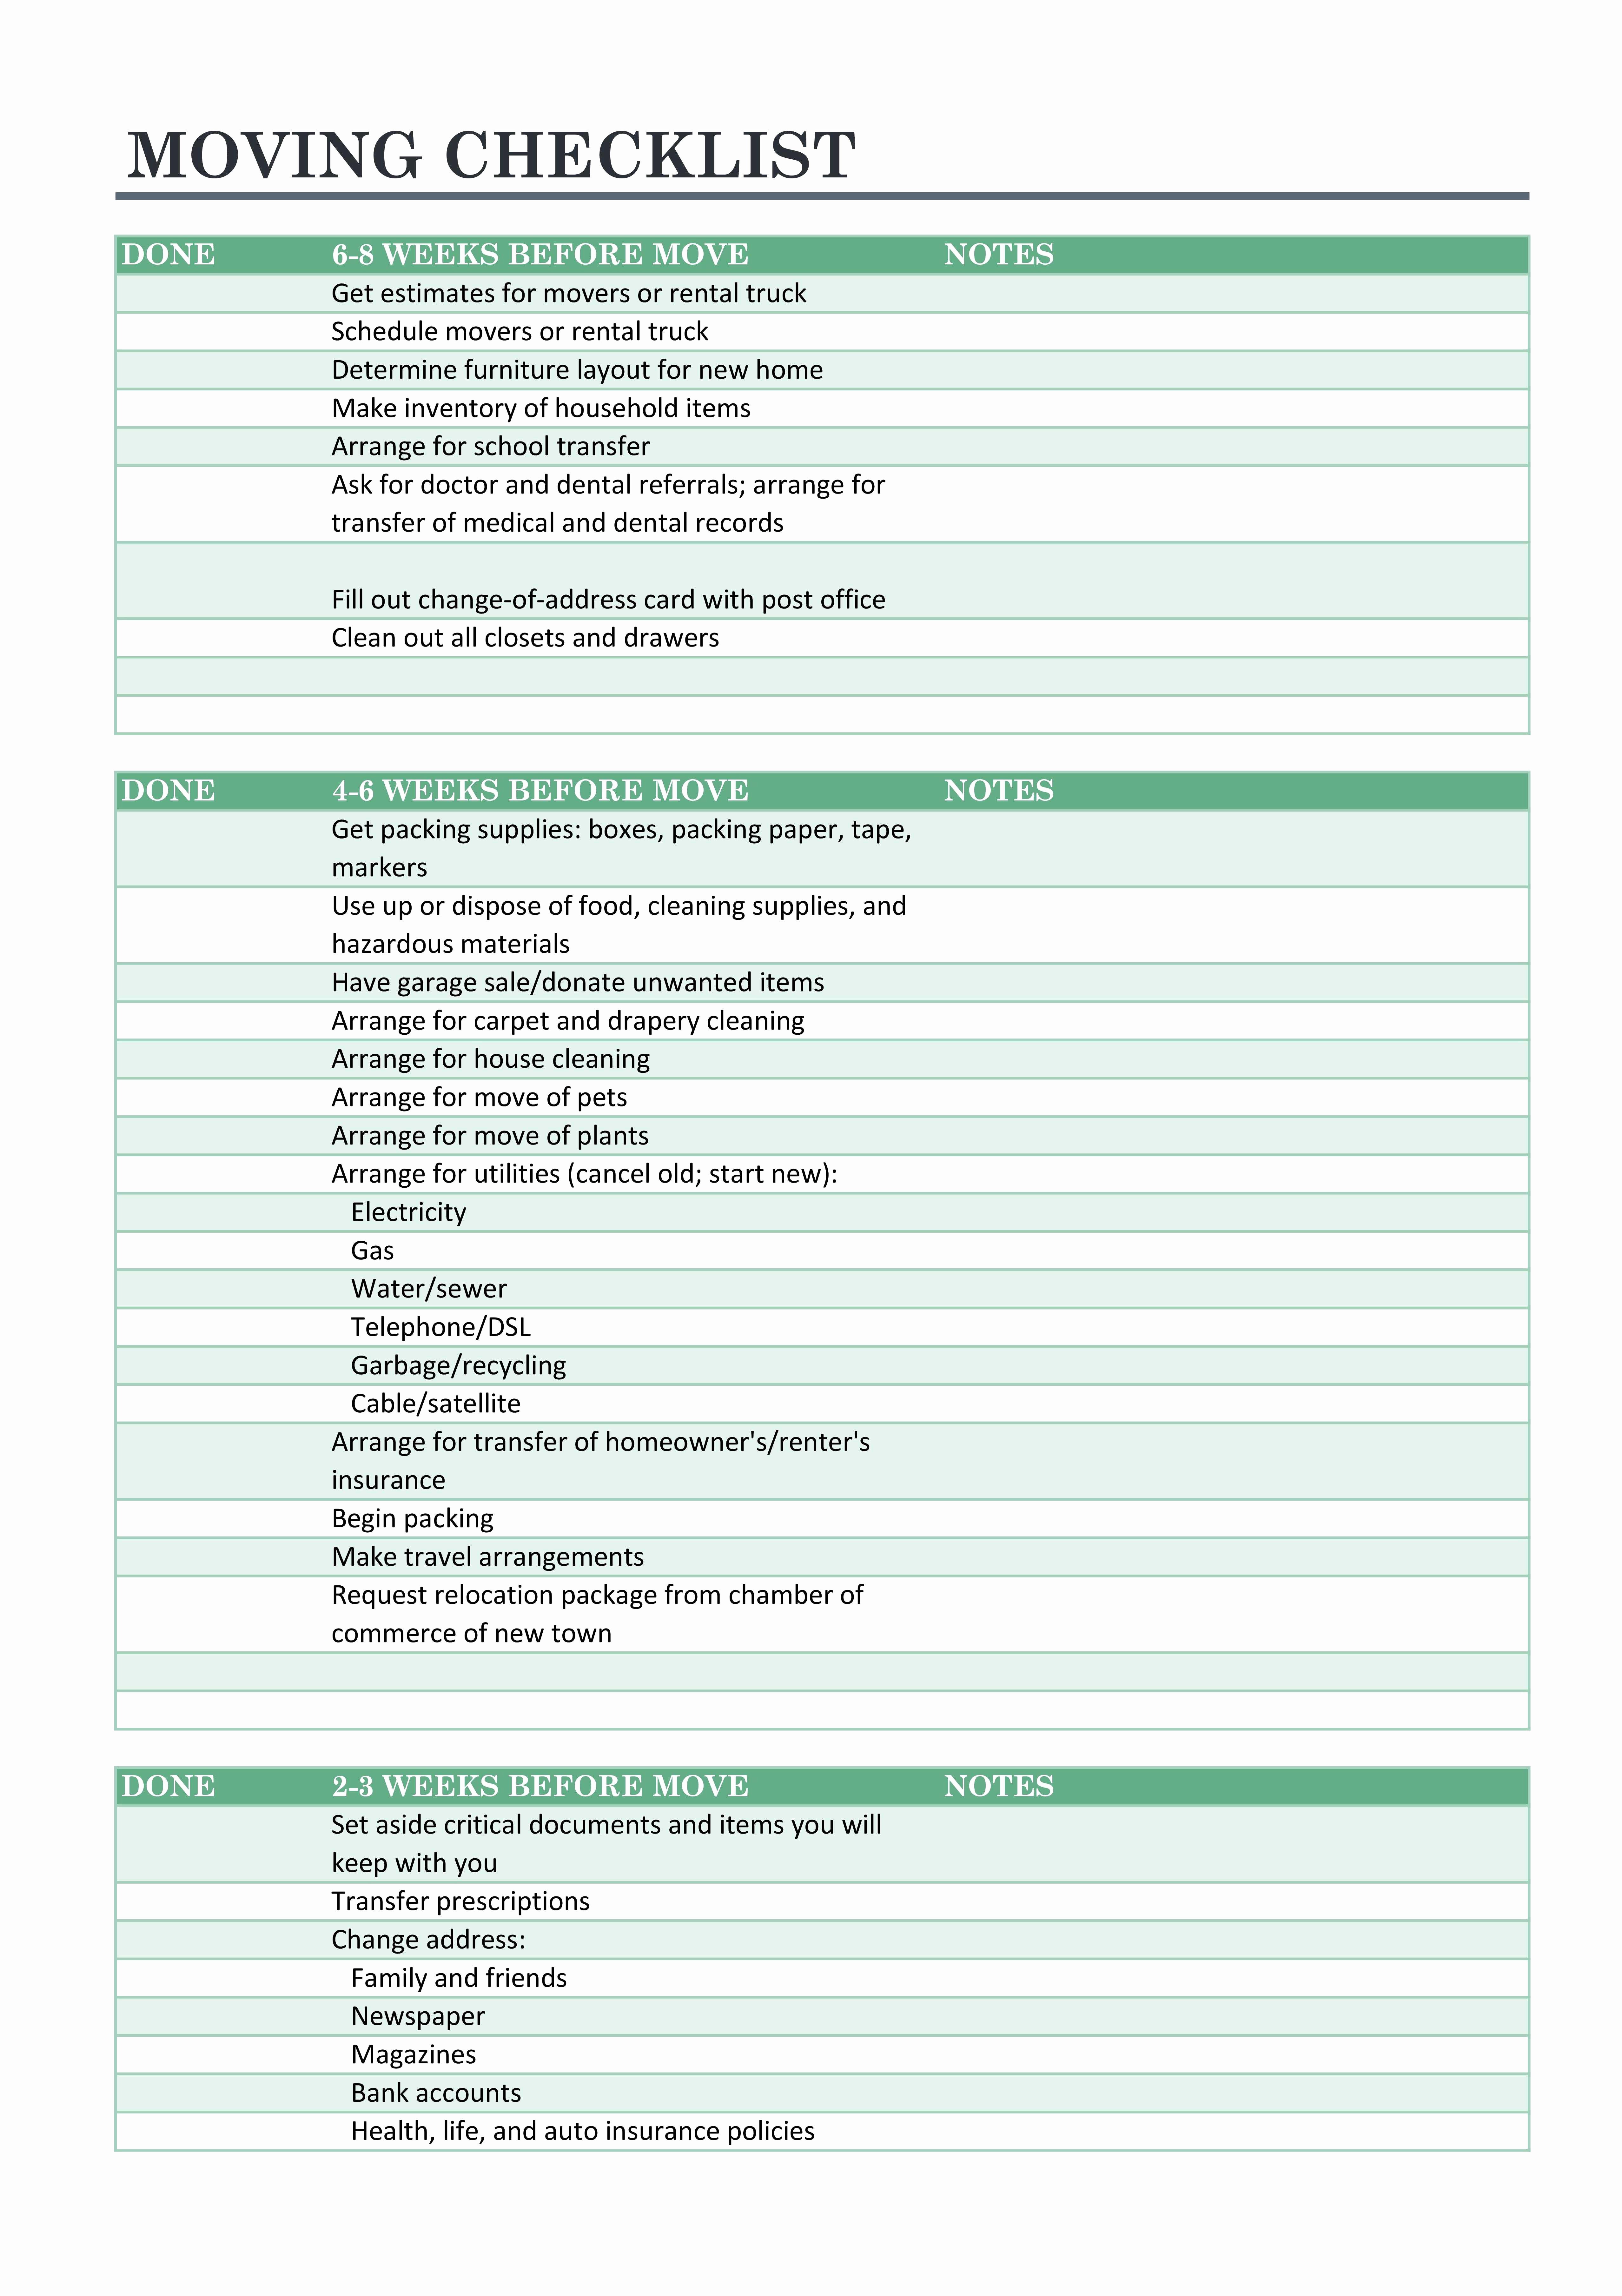 Move Out Cleaning Checklist Template Lovely 45 Great Moving Checklists [checklist for Moving In Out